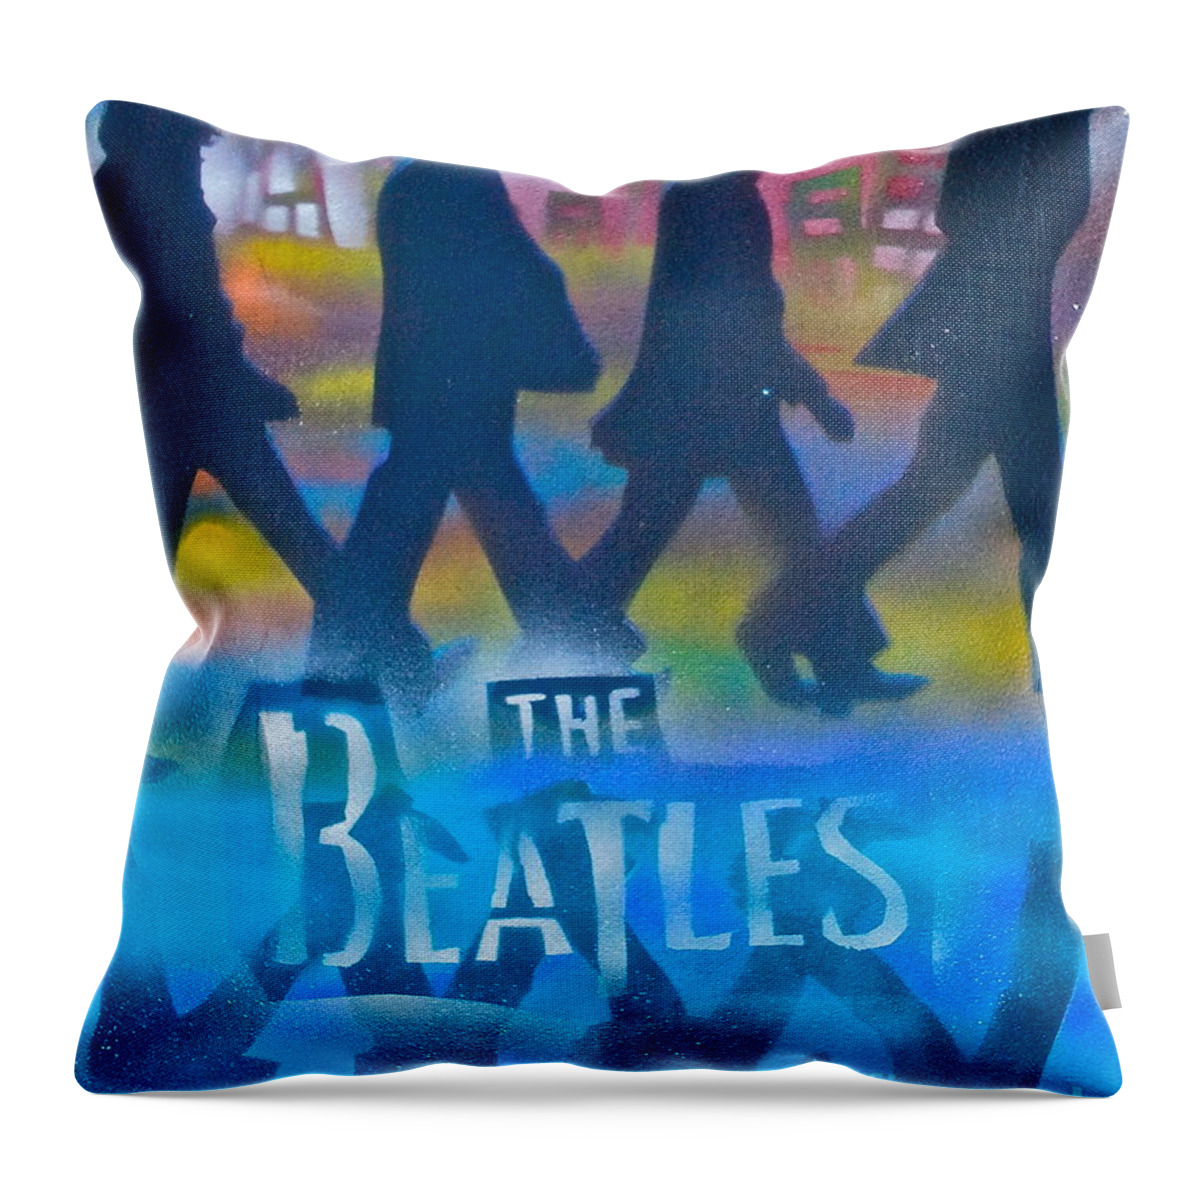 The Beatles Throw Pillow featuring the painting The Beatles Walk by Tony B Conscious